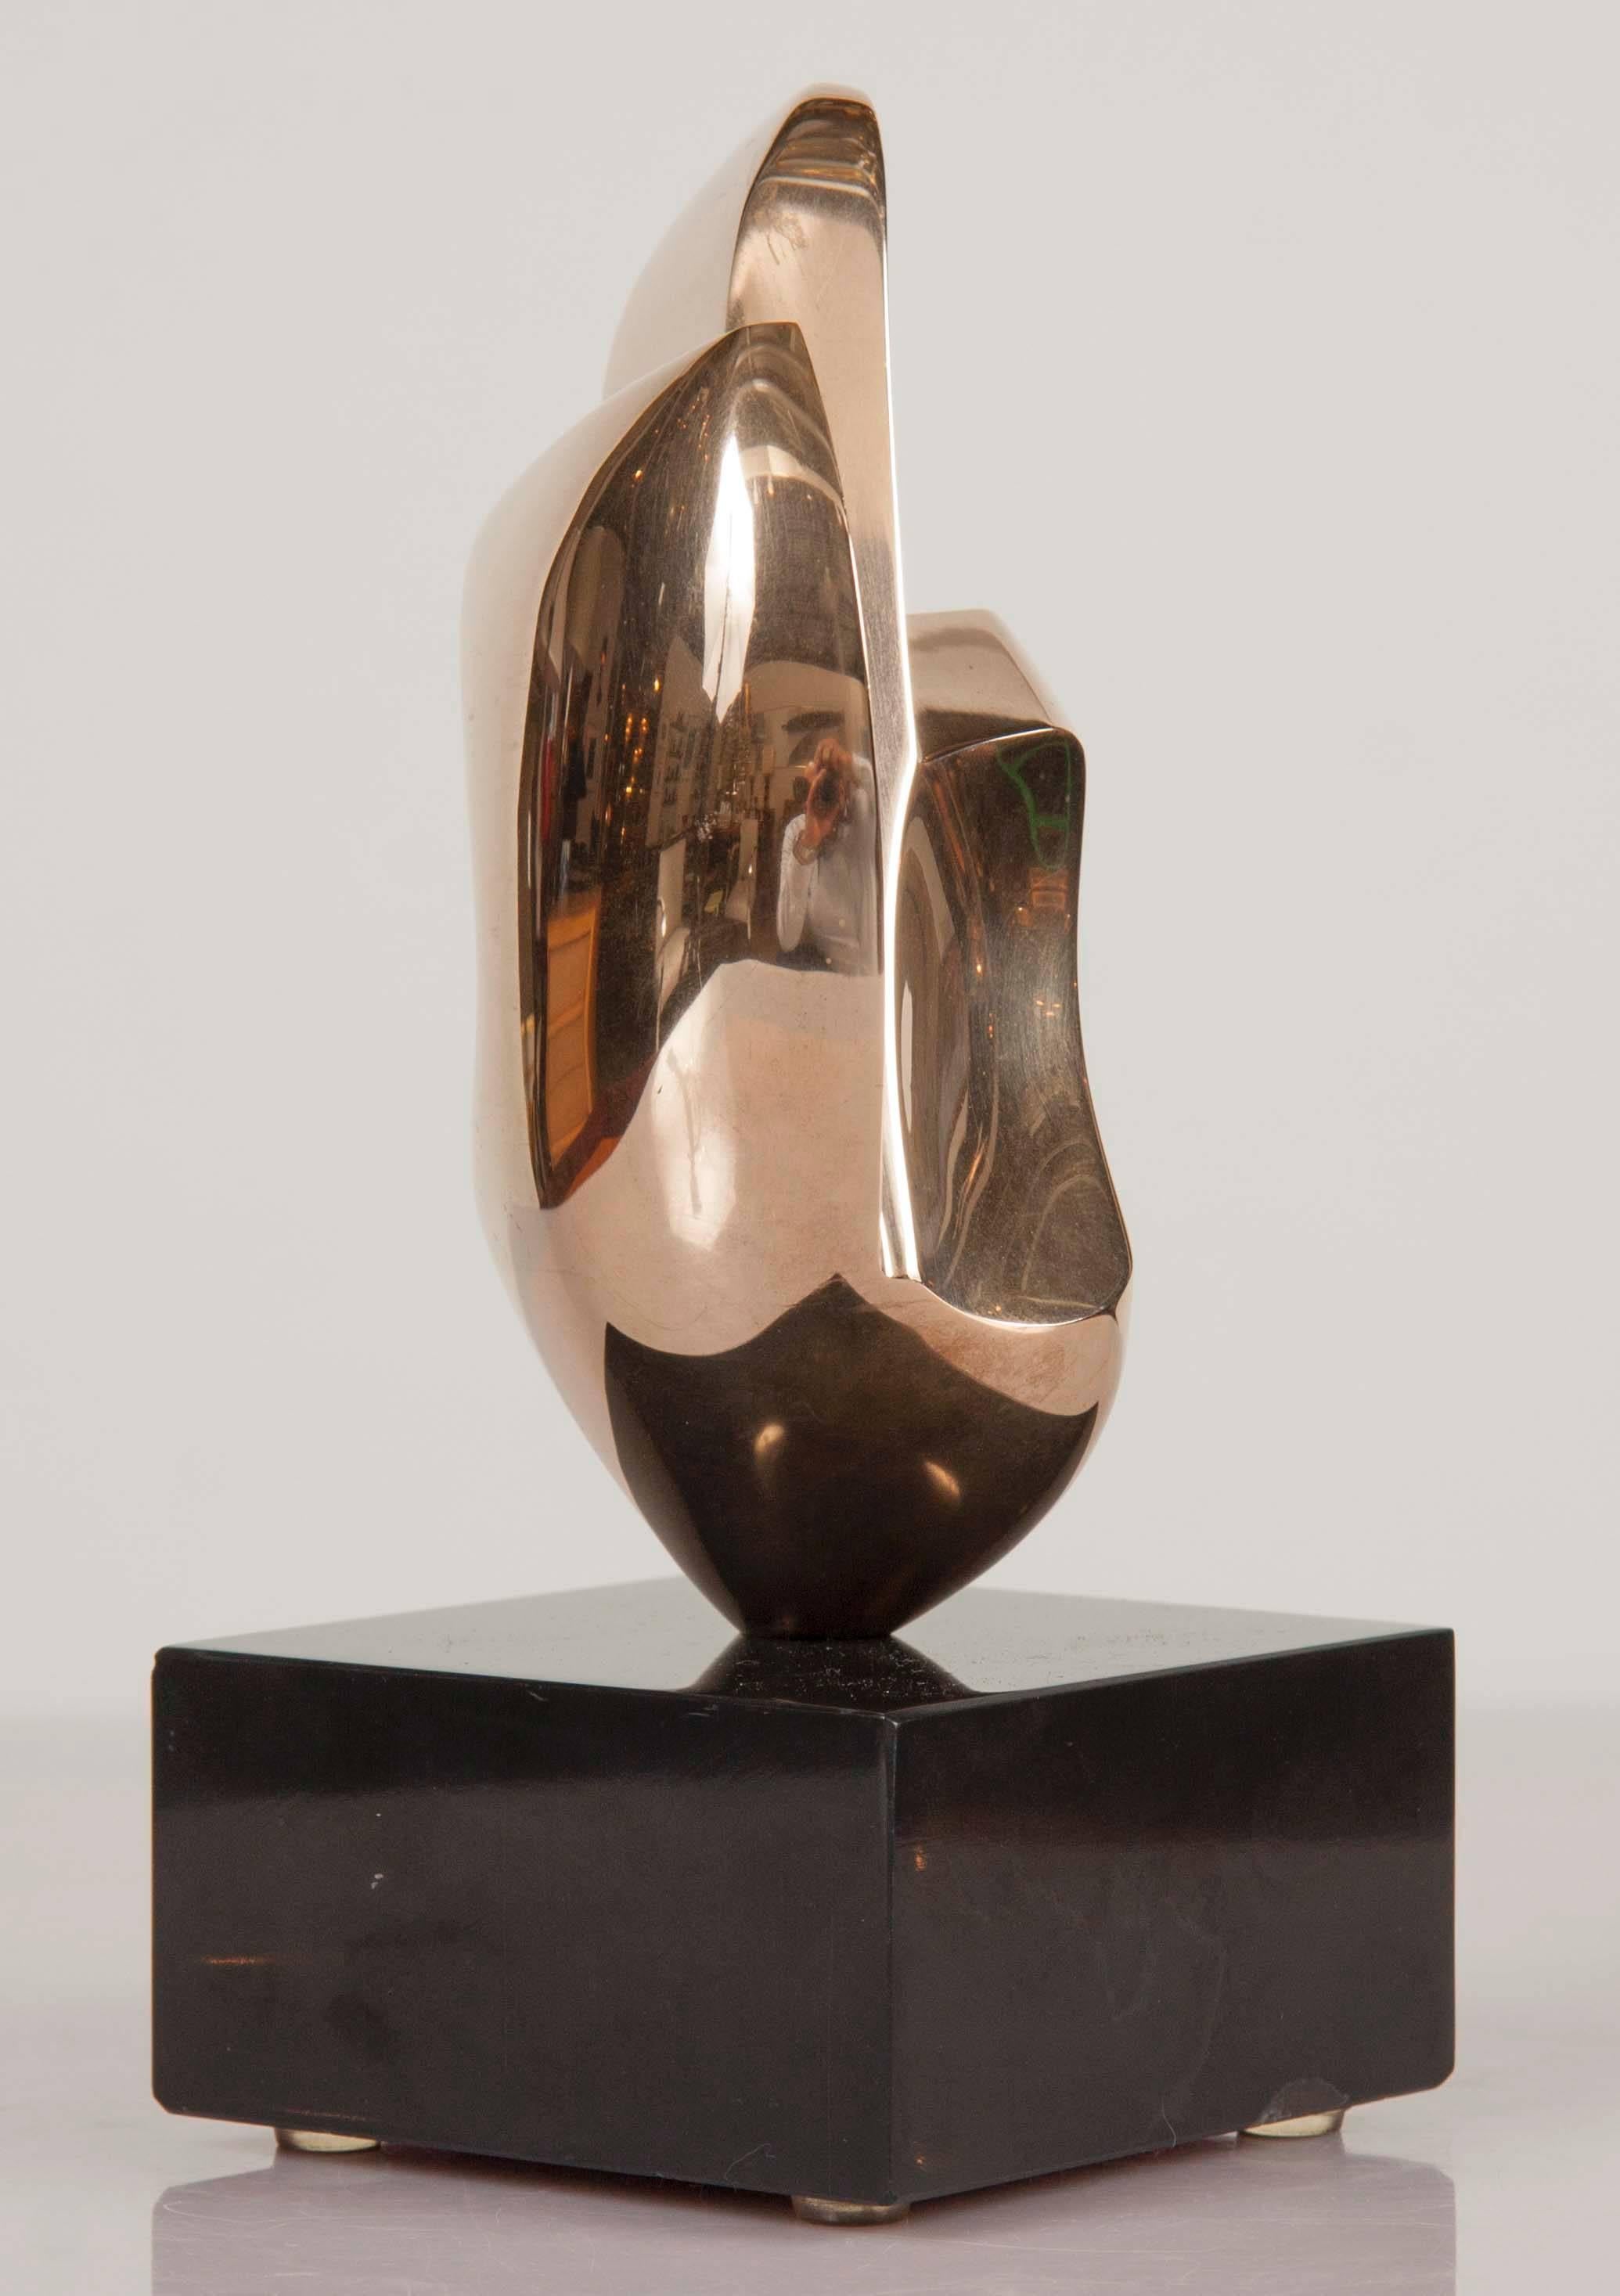 Bronze Abstract Sculpture by Antonio Grediaga Kieff, Signed and Numbered 5/9 1